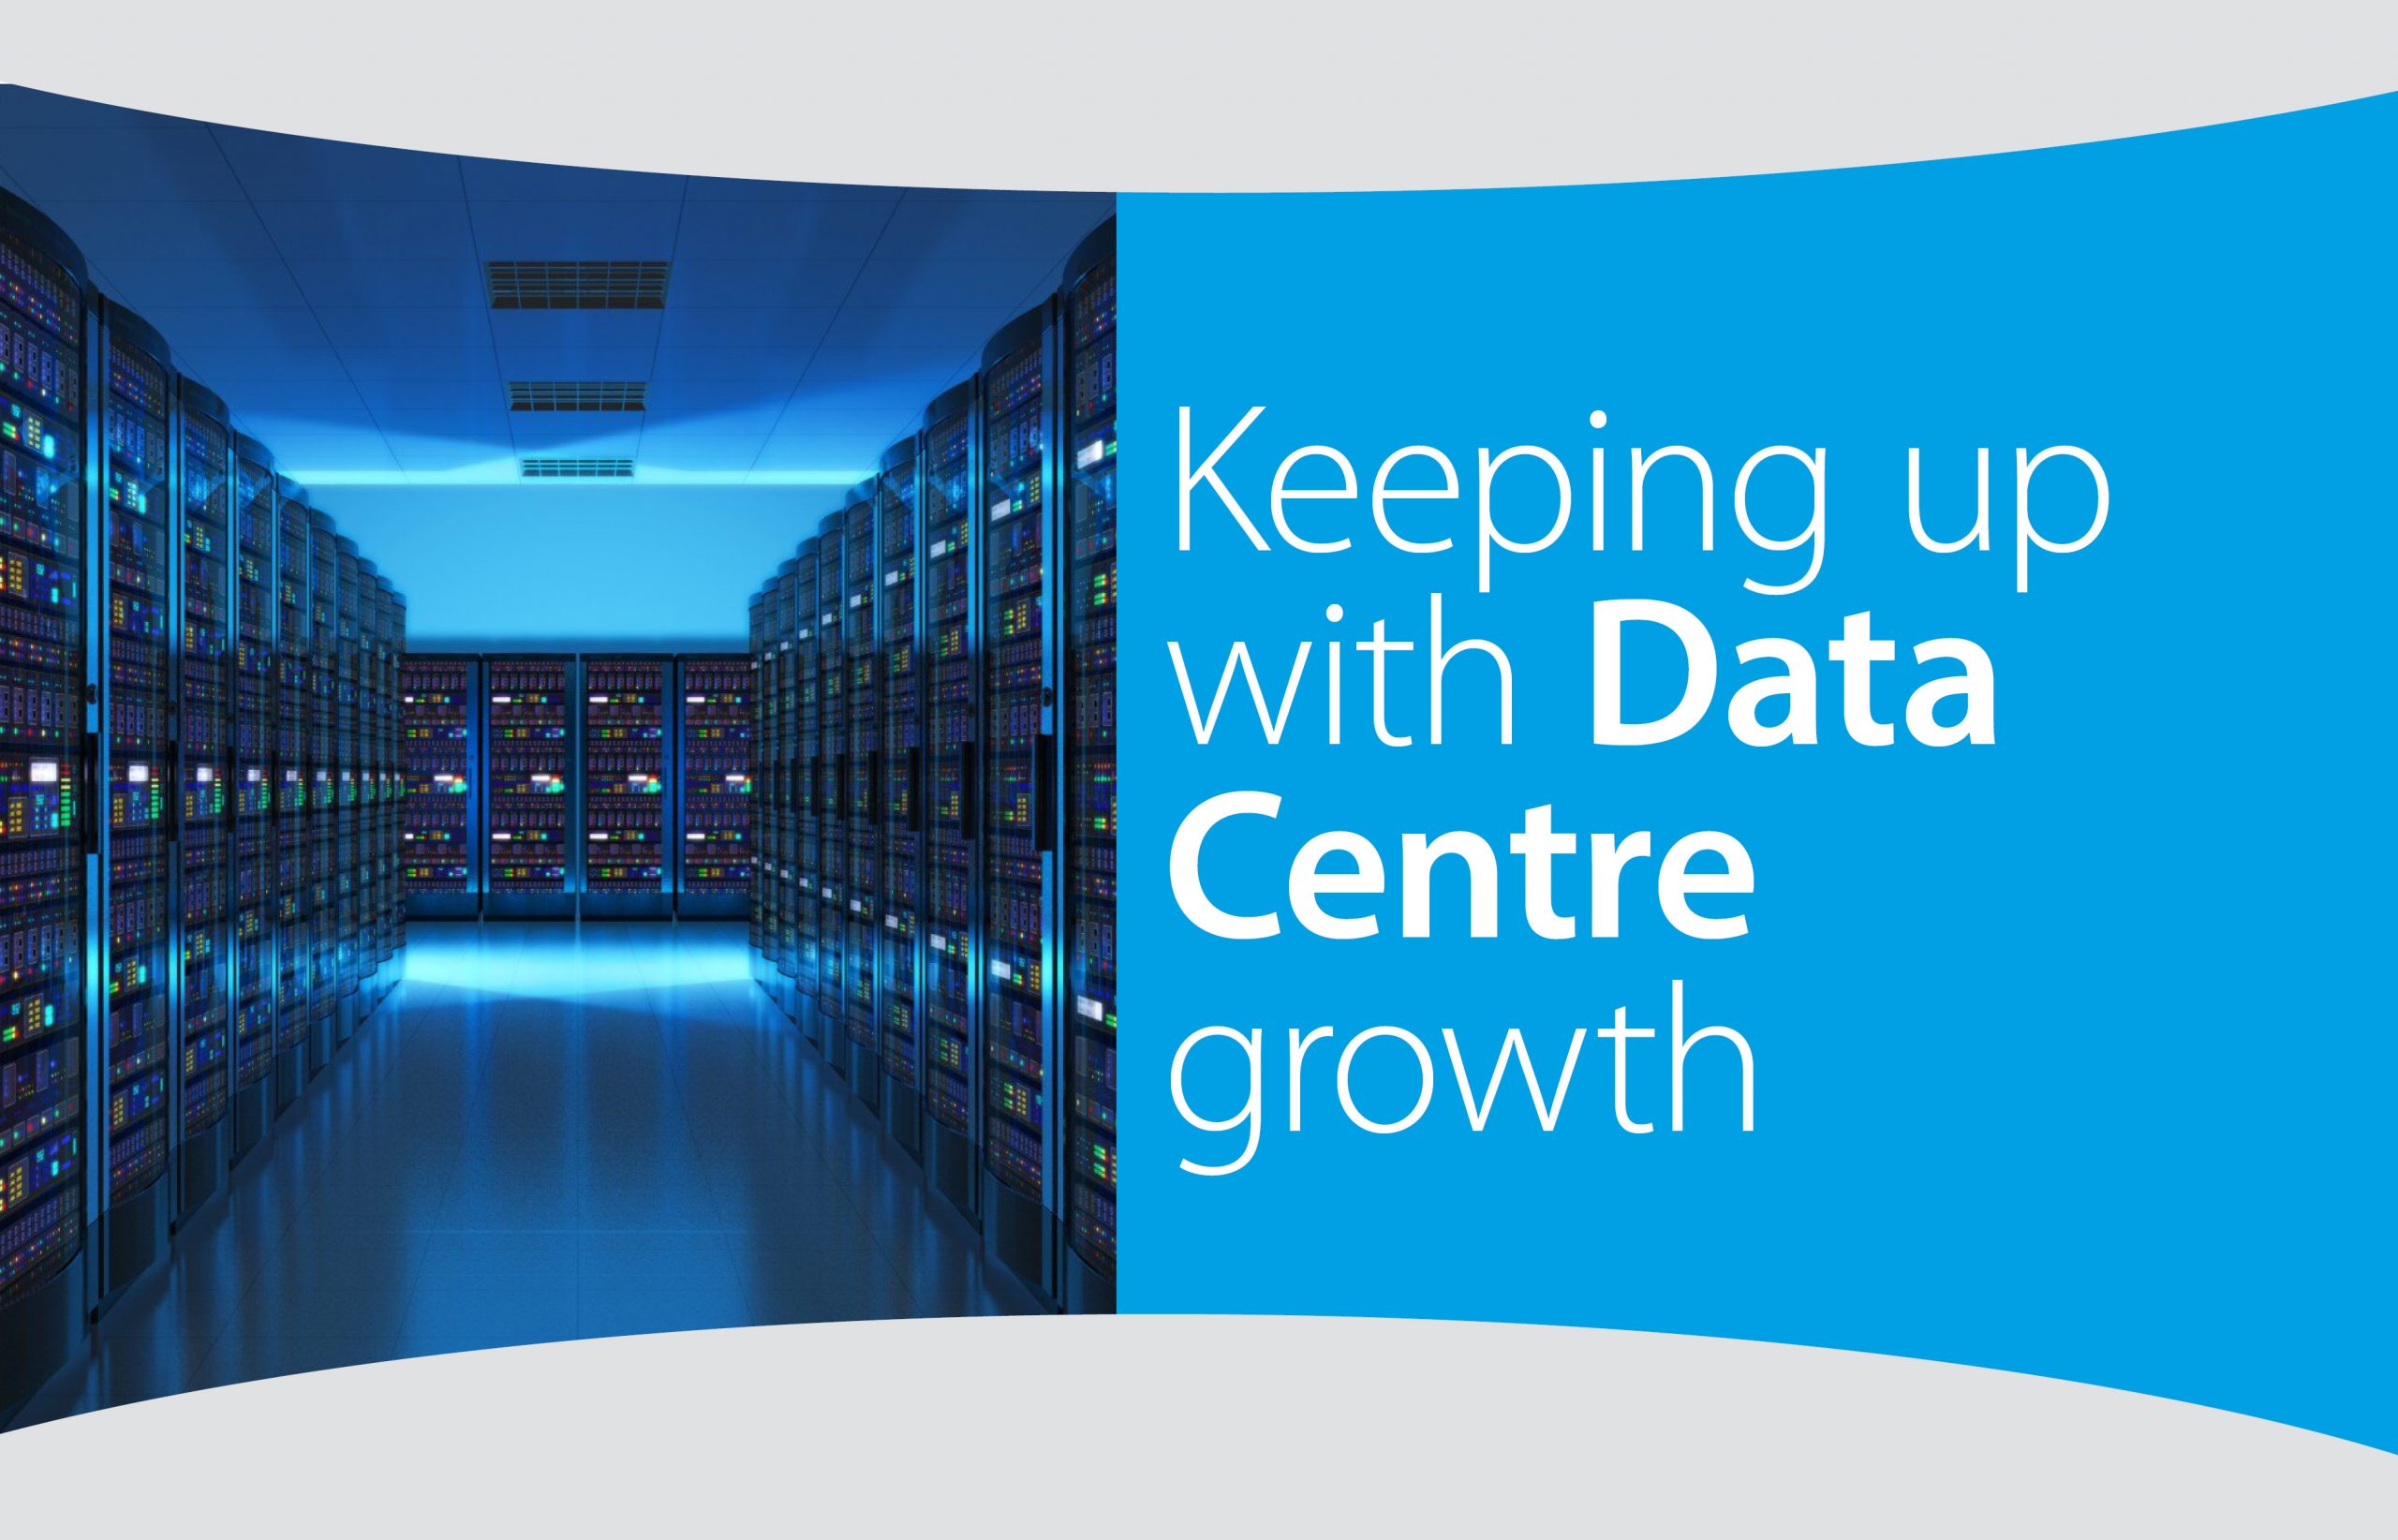 Keeping up with Data Centre growth